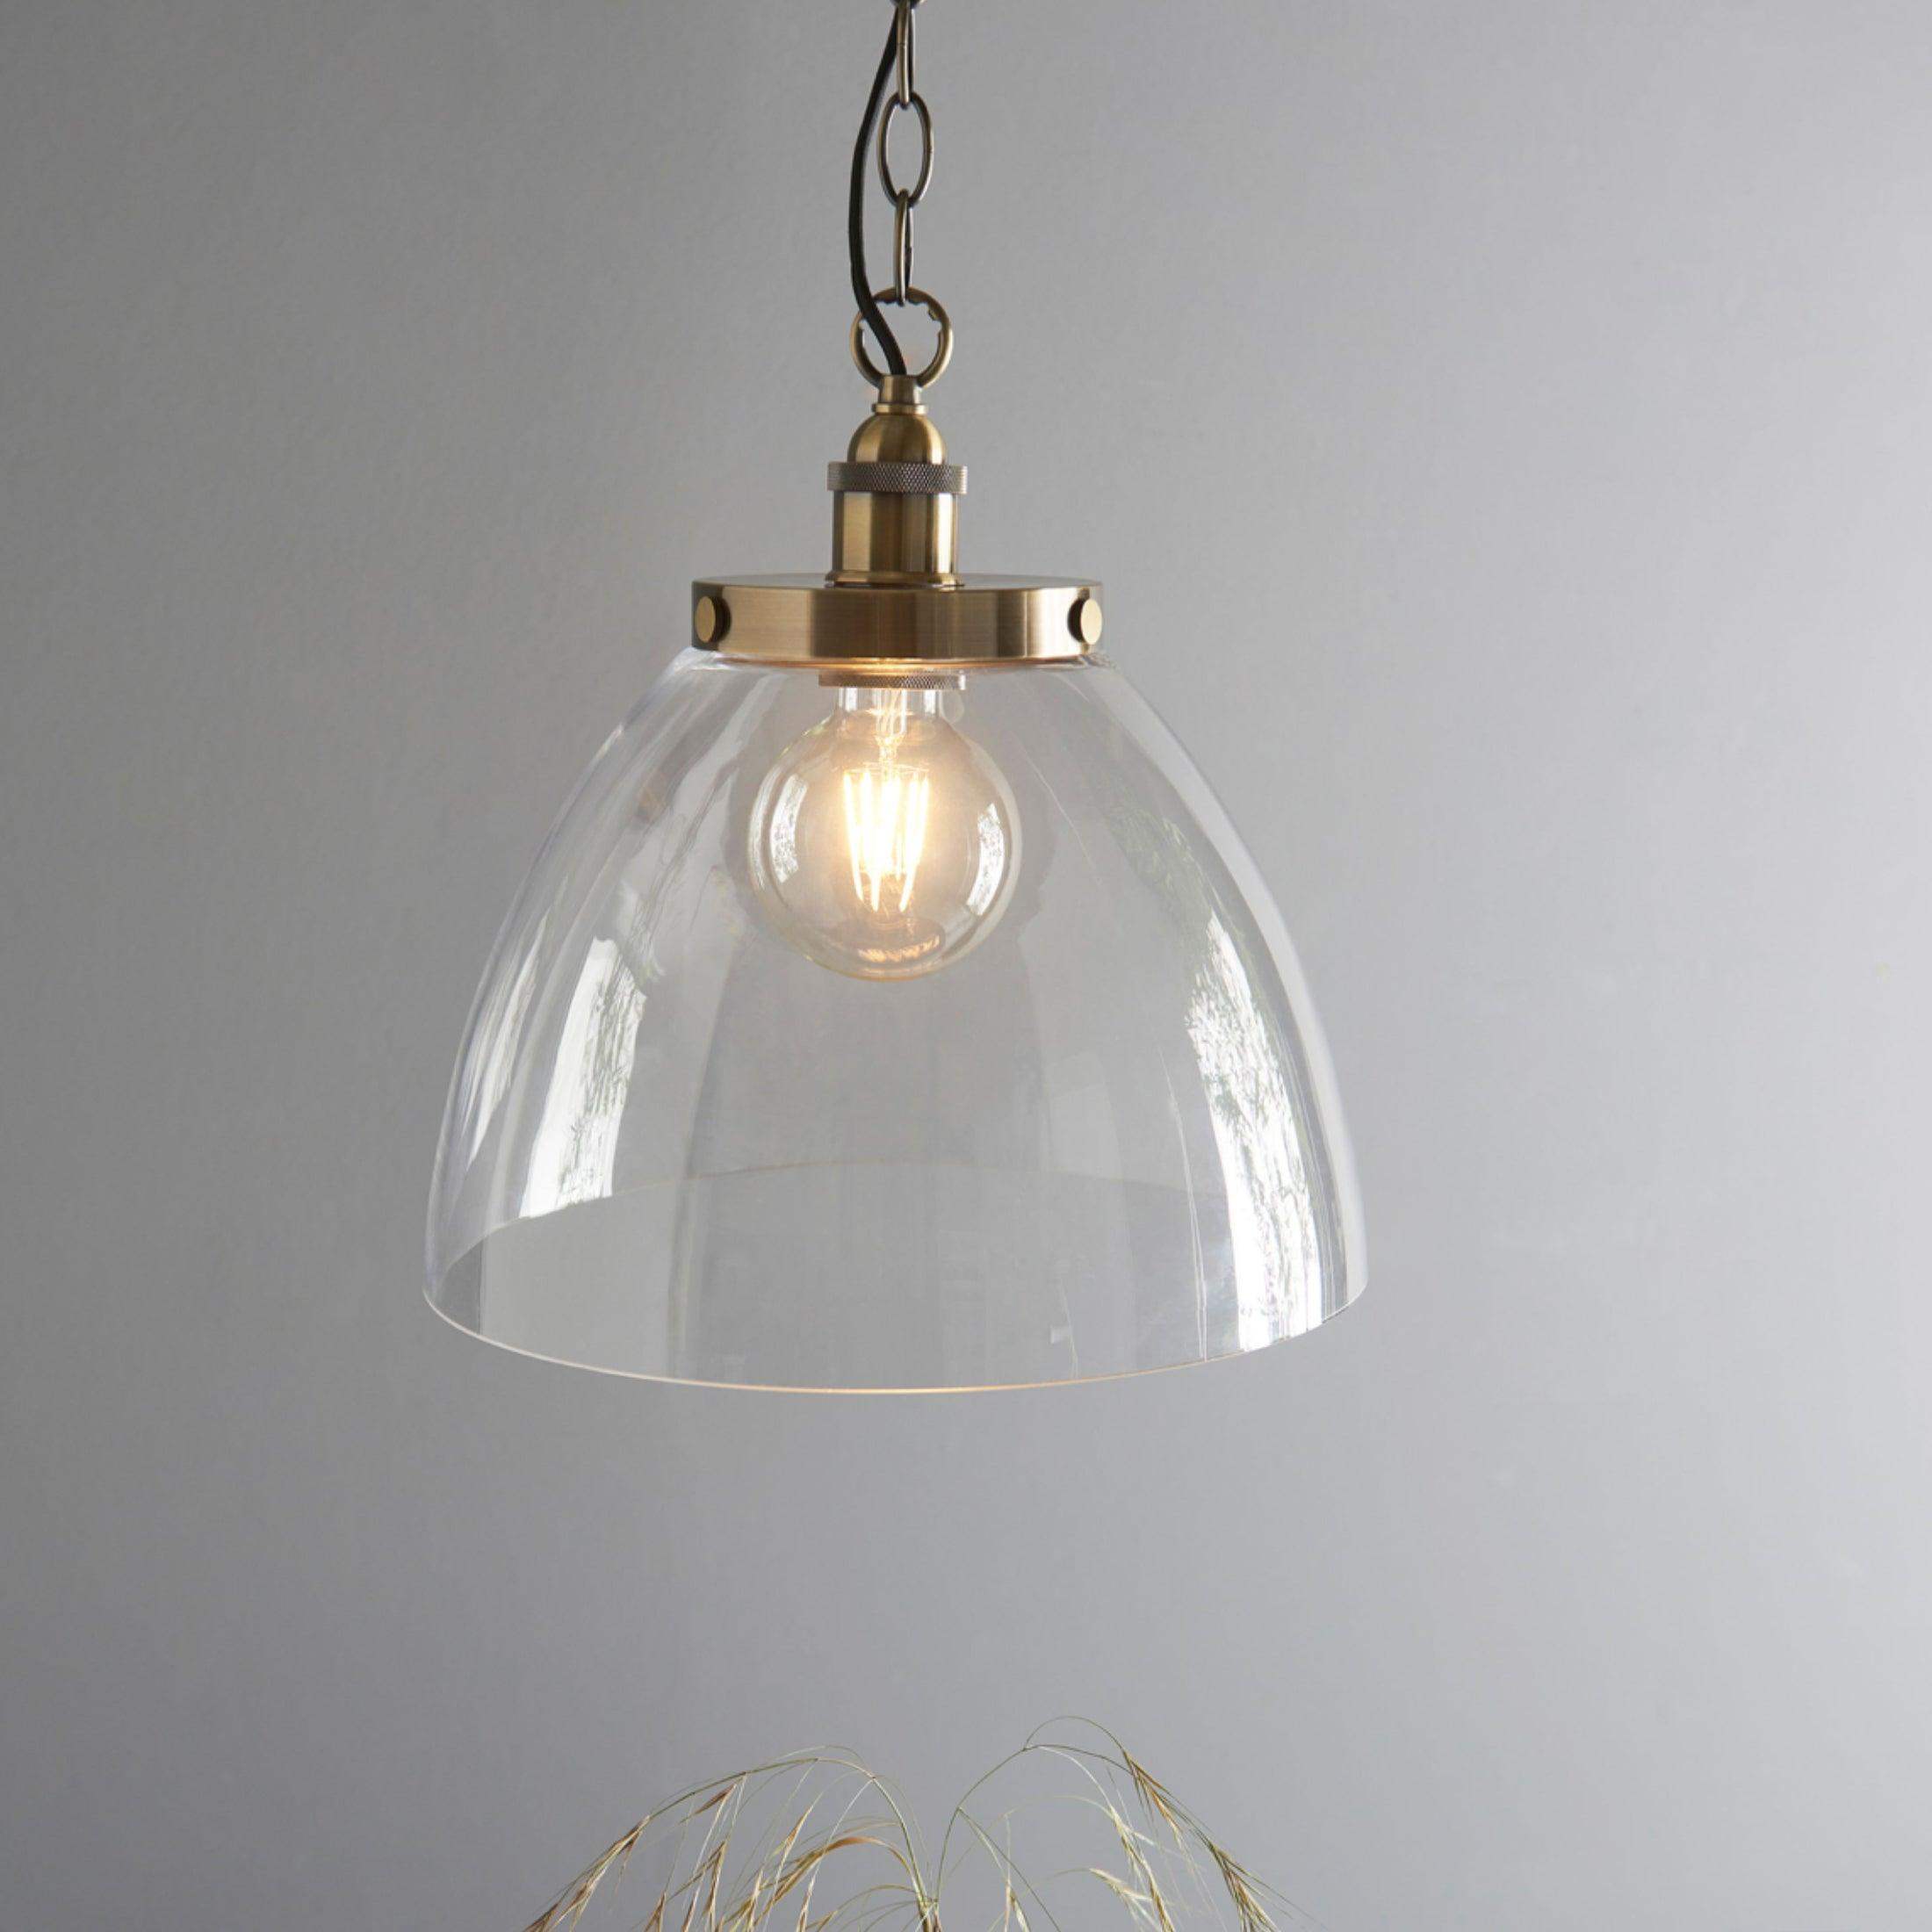 Large Glass Dome & Aged Brass Pendant Light